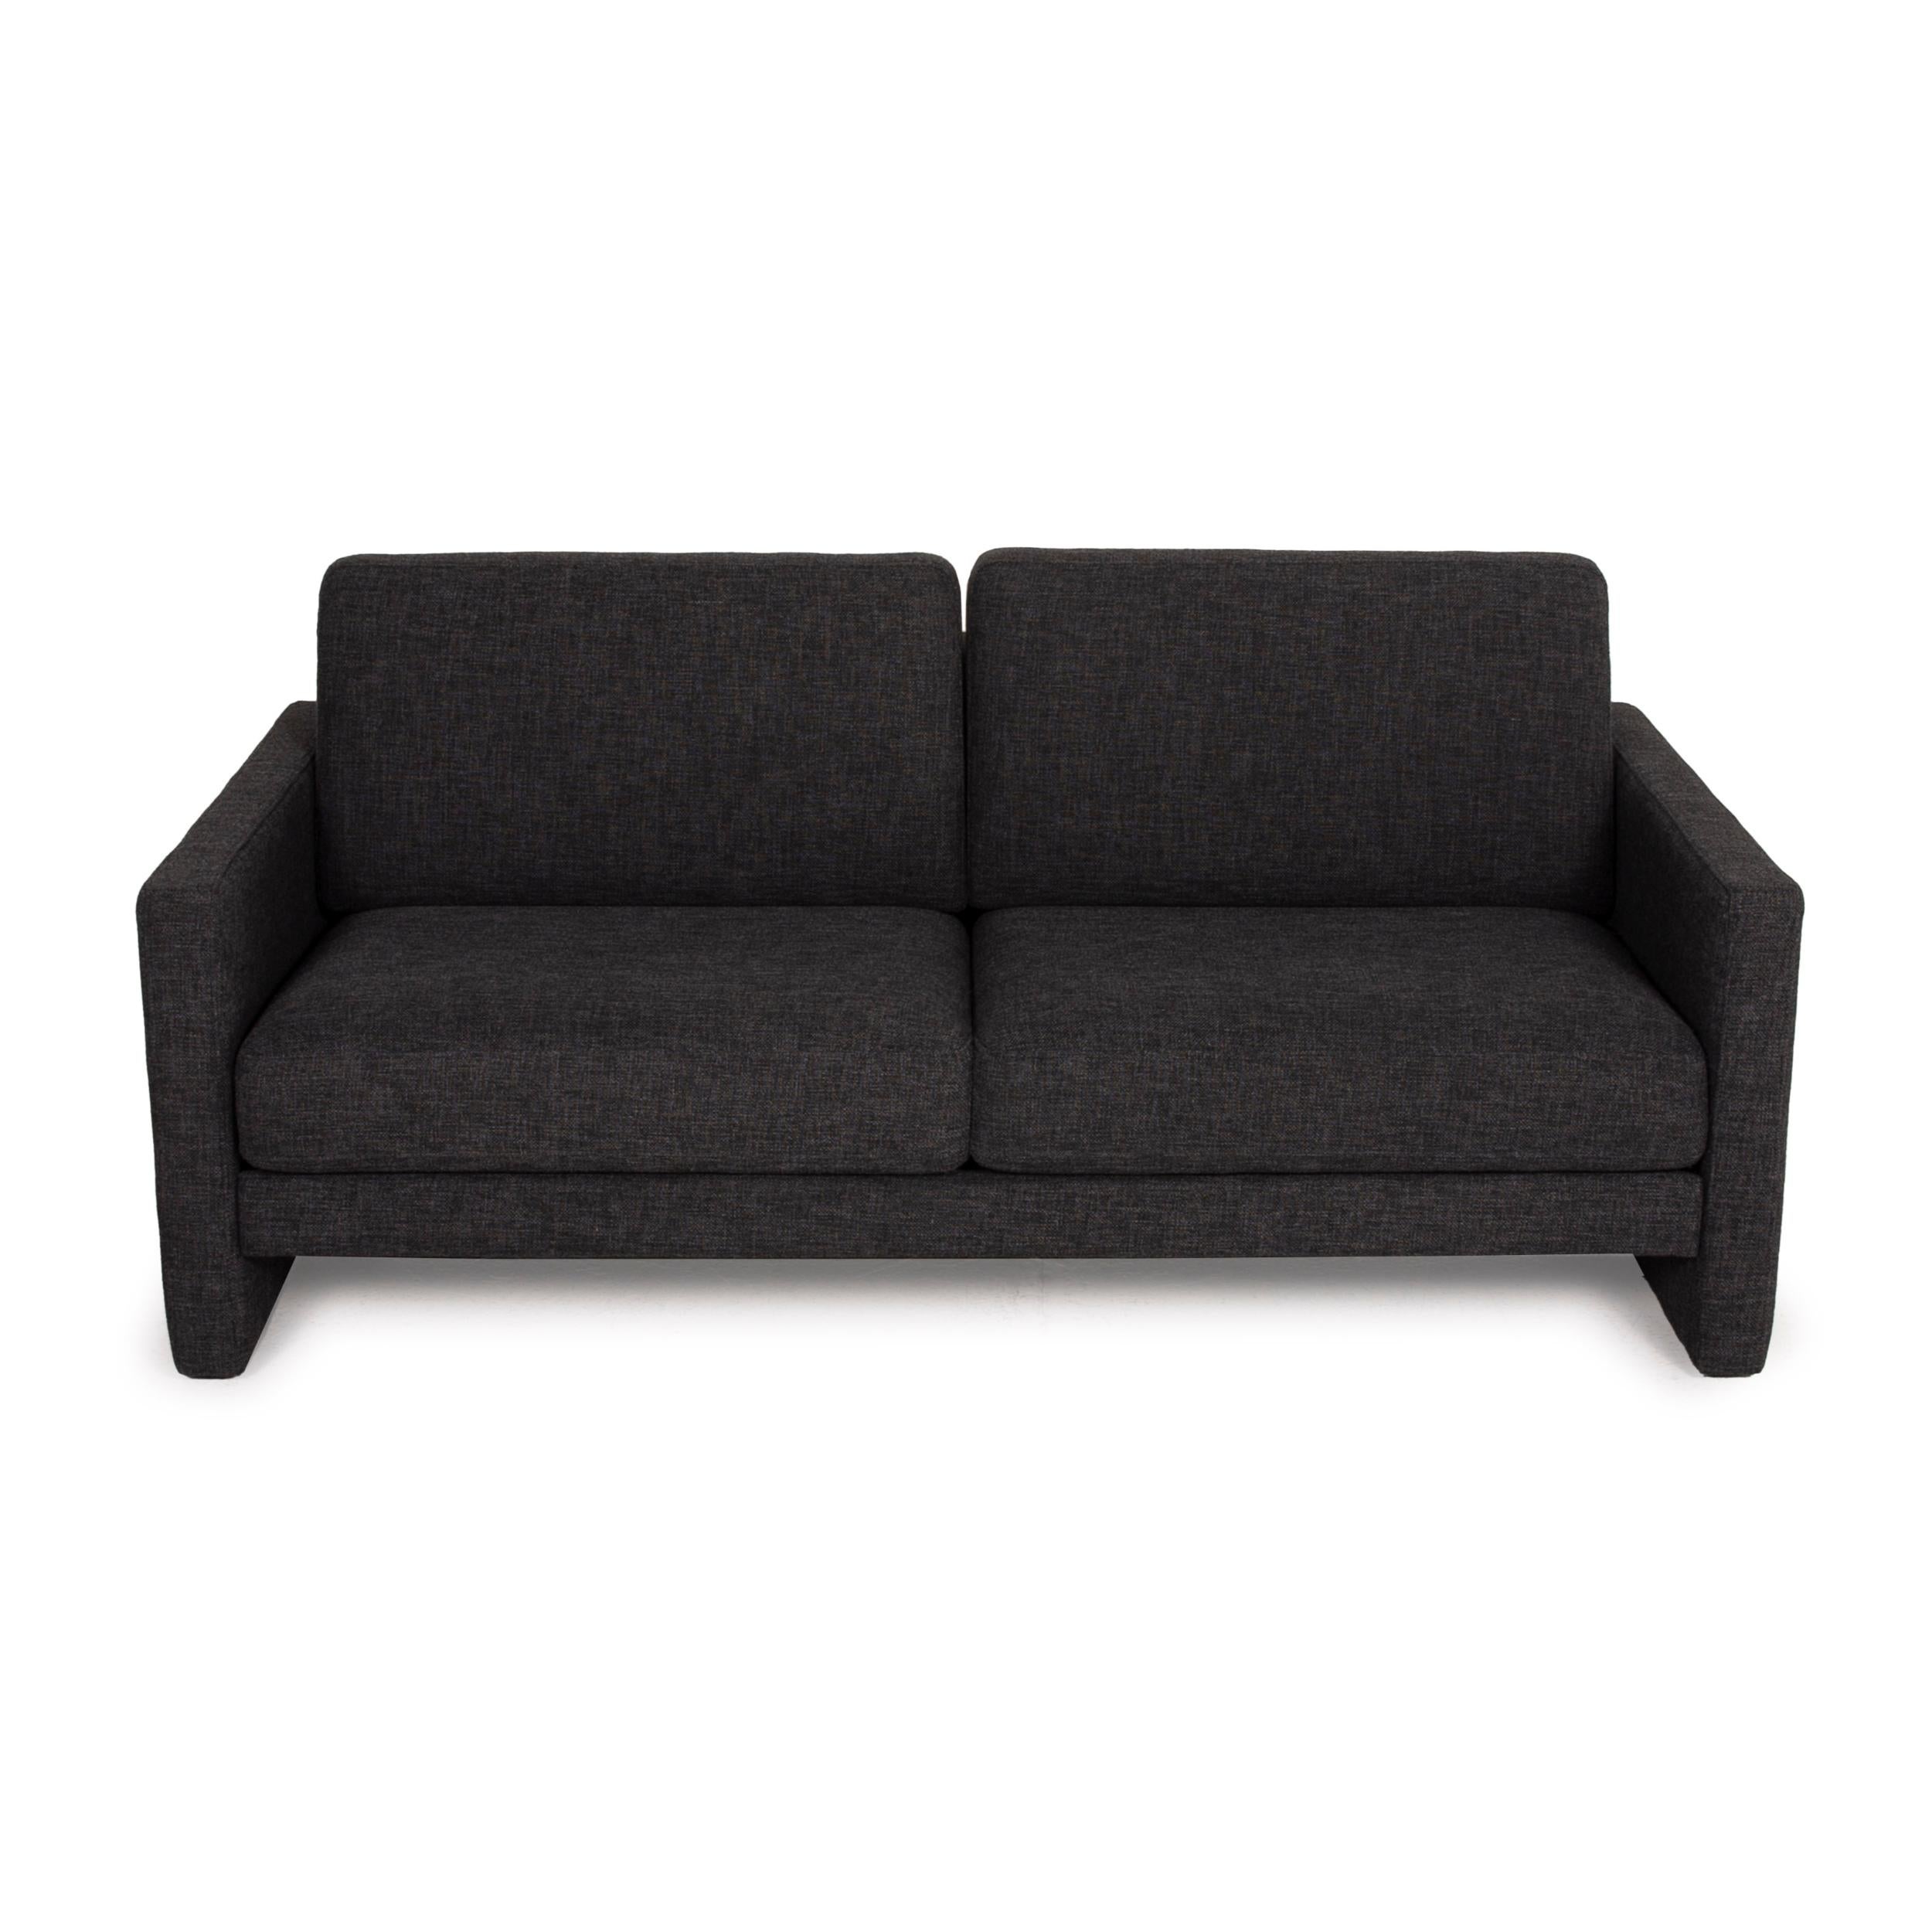 Aannemer bescherming Nationale volkstelling Rolf Benz Two-Seater Sofa Fabric Gray Anthracite For Sale at 1stDibs